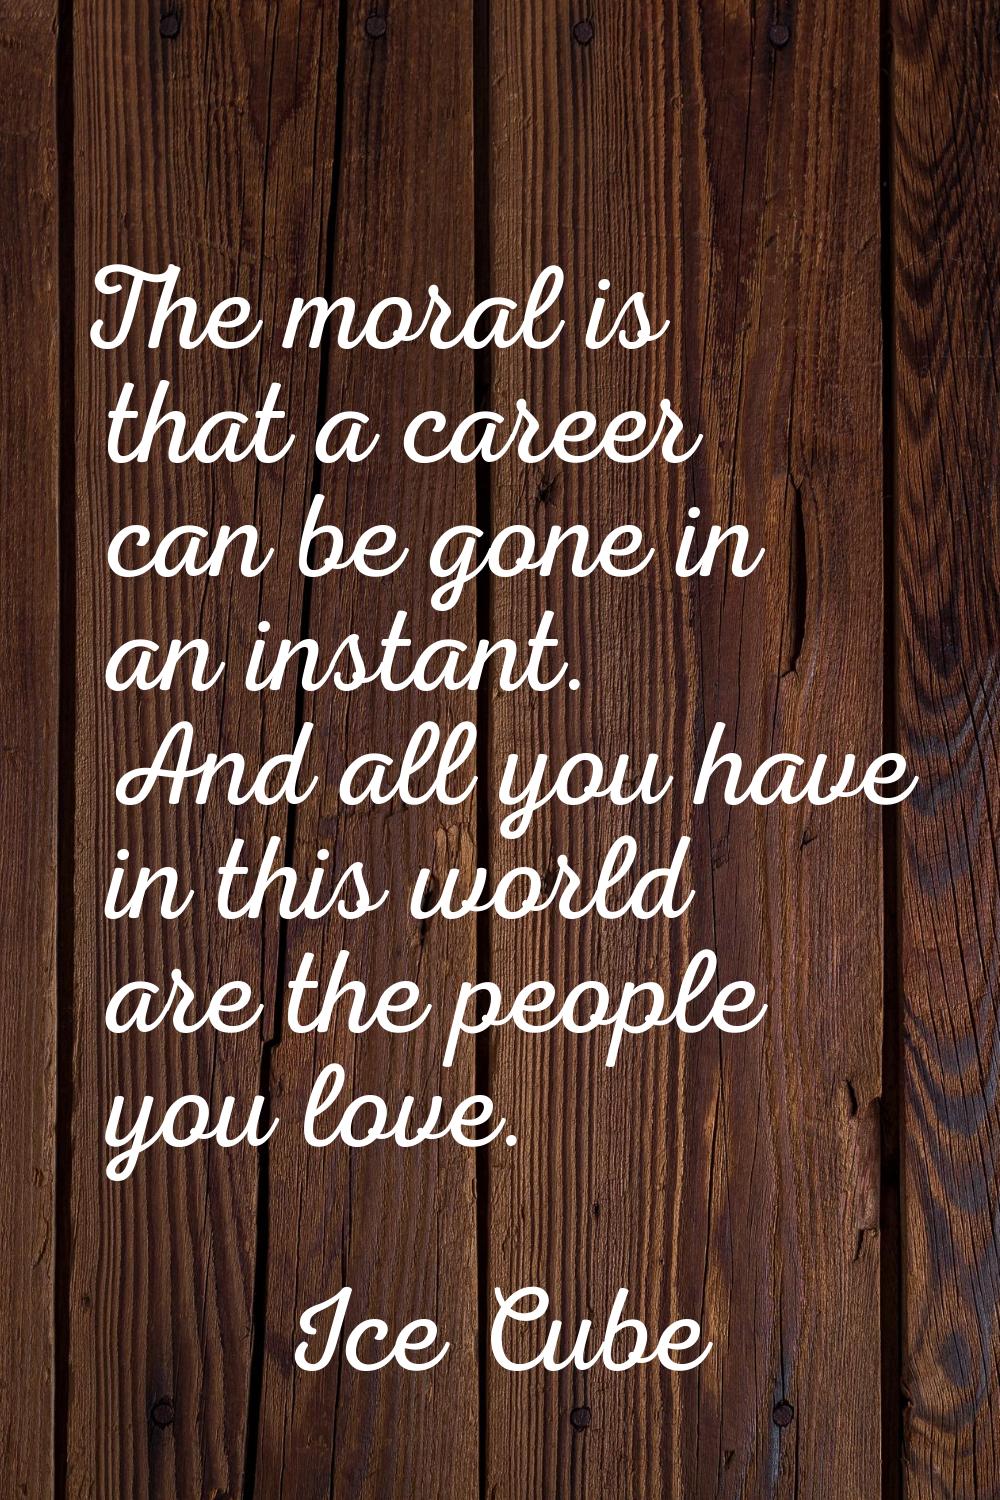 The moral is that a career can be gone in an instant. And all you have in this world are the people